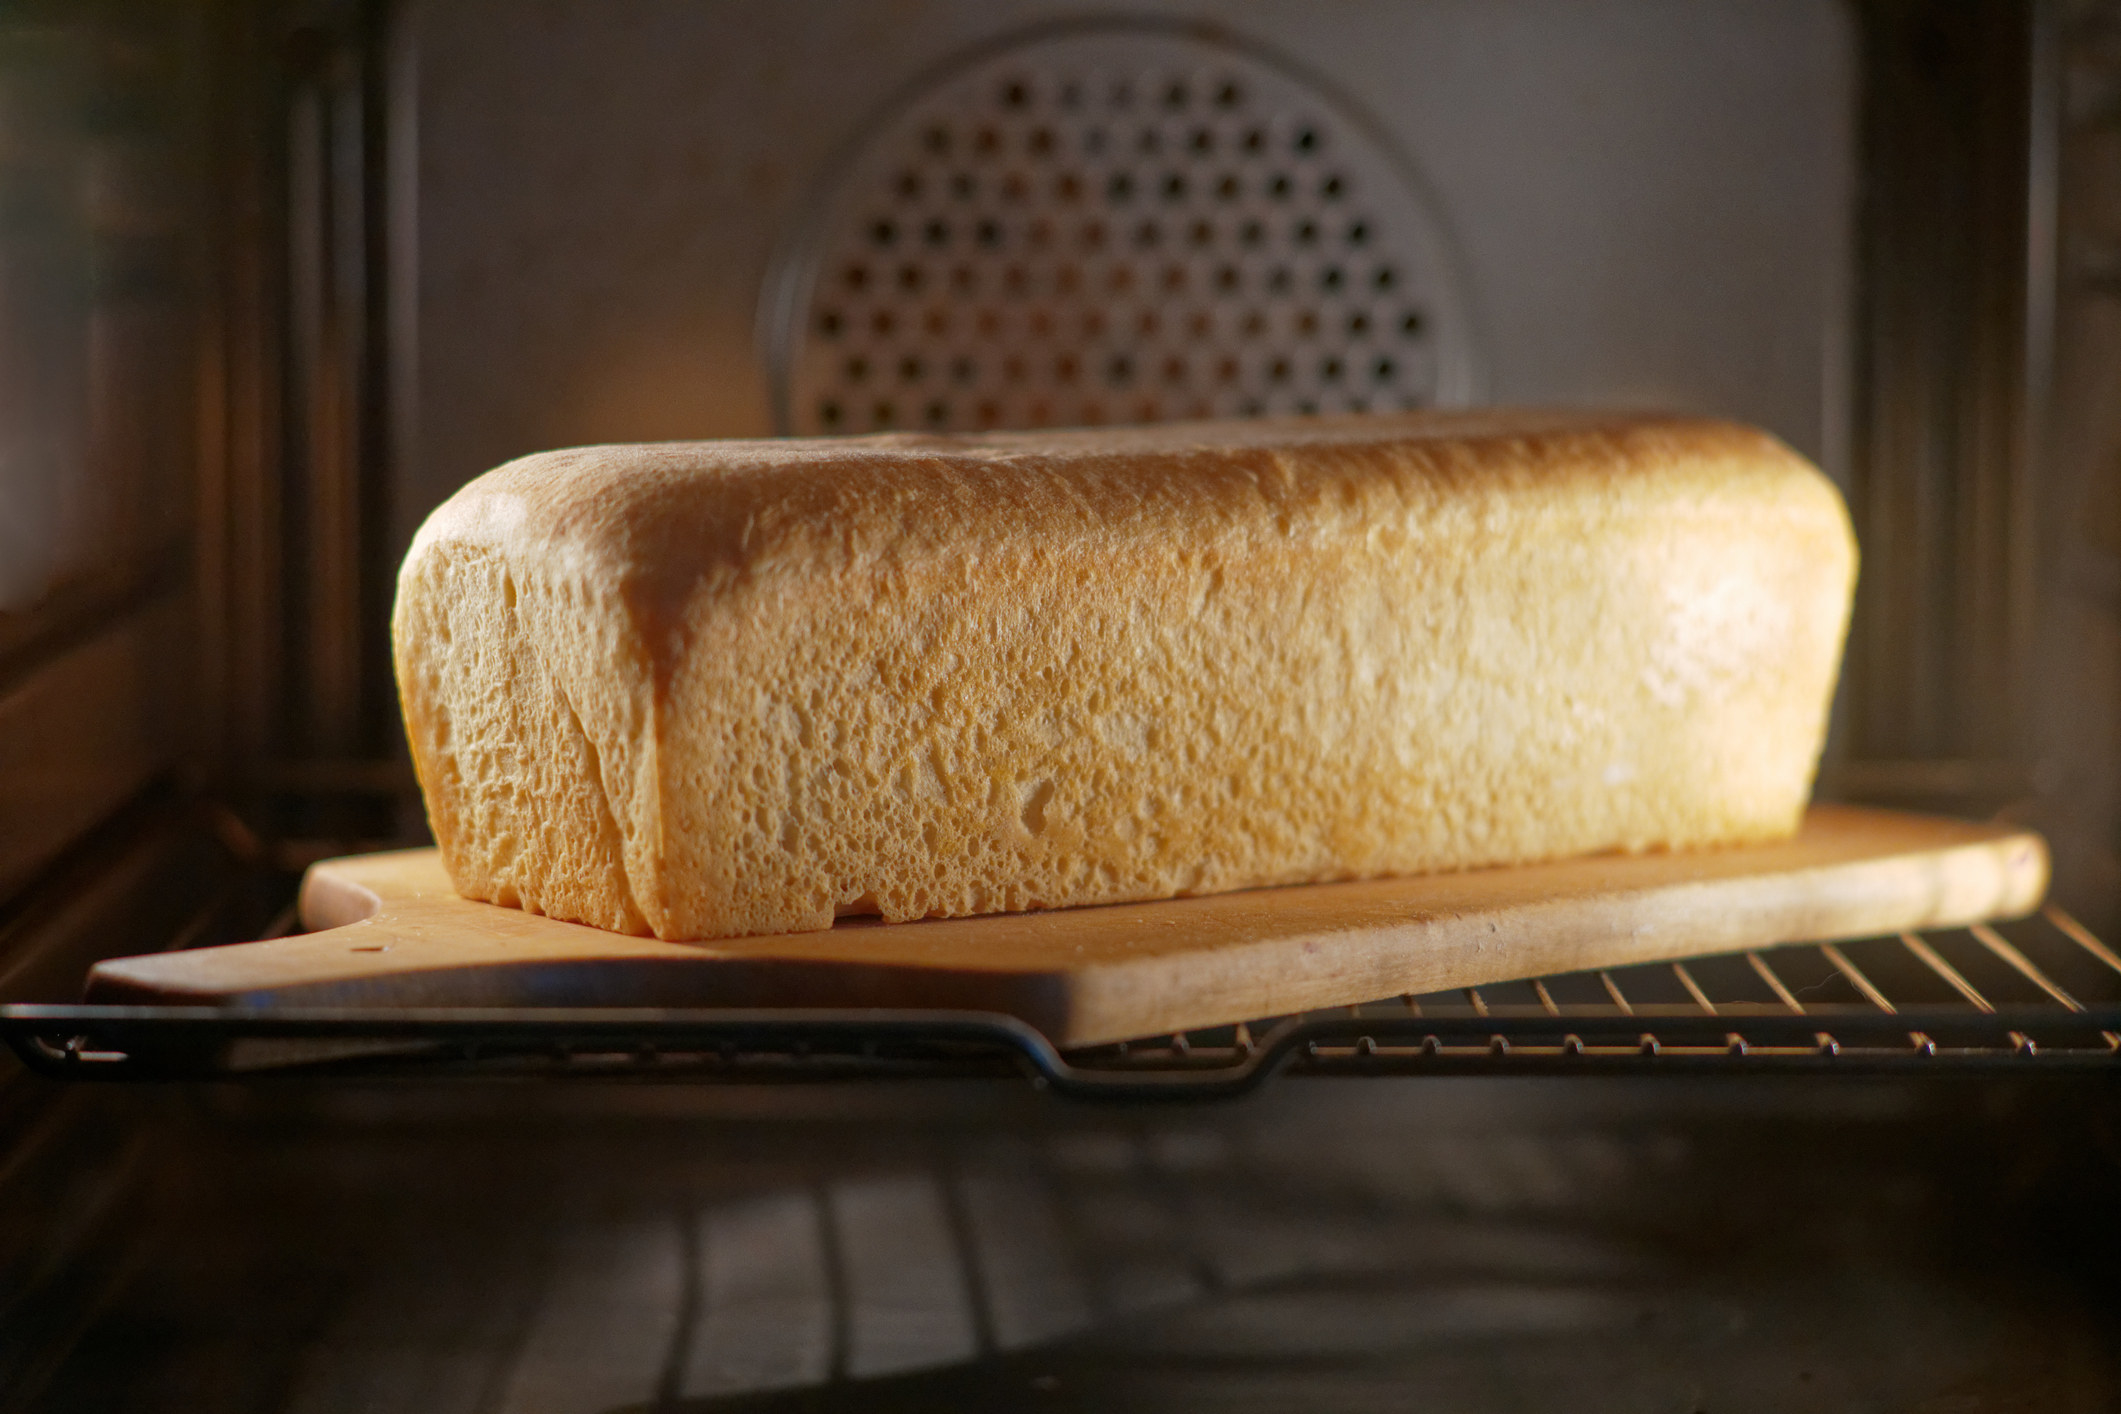 A loaf of bread in an oven.